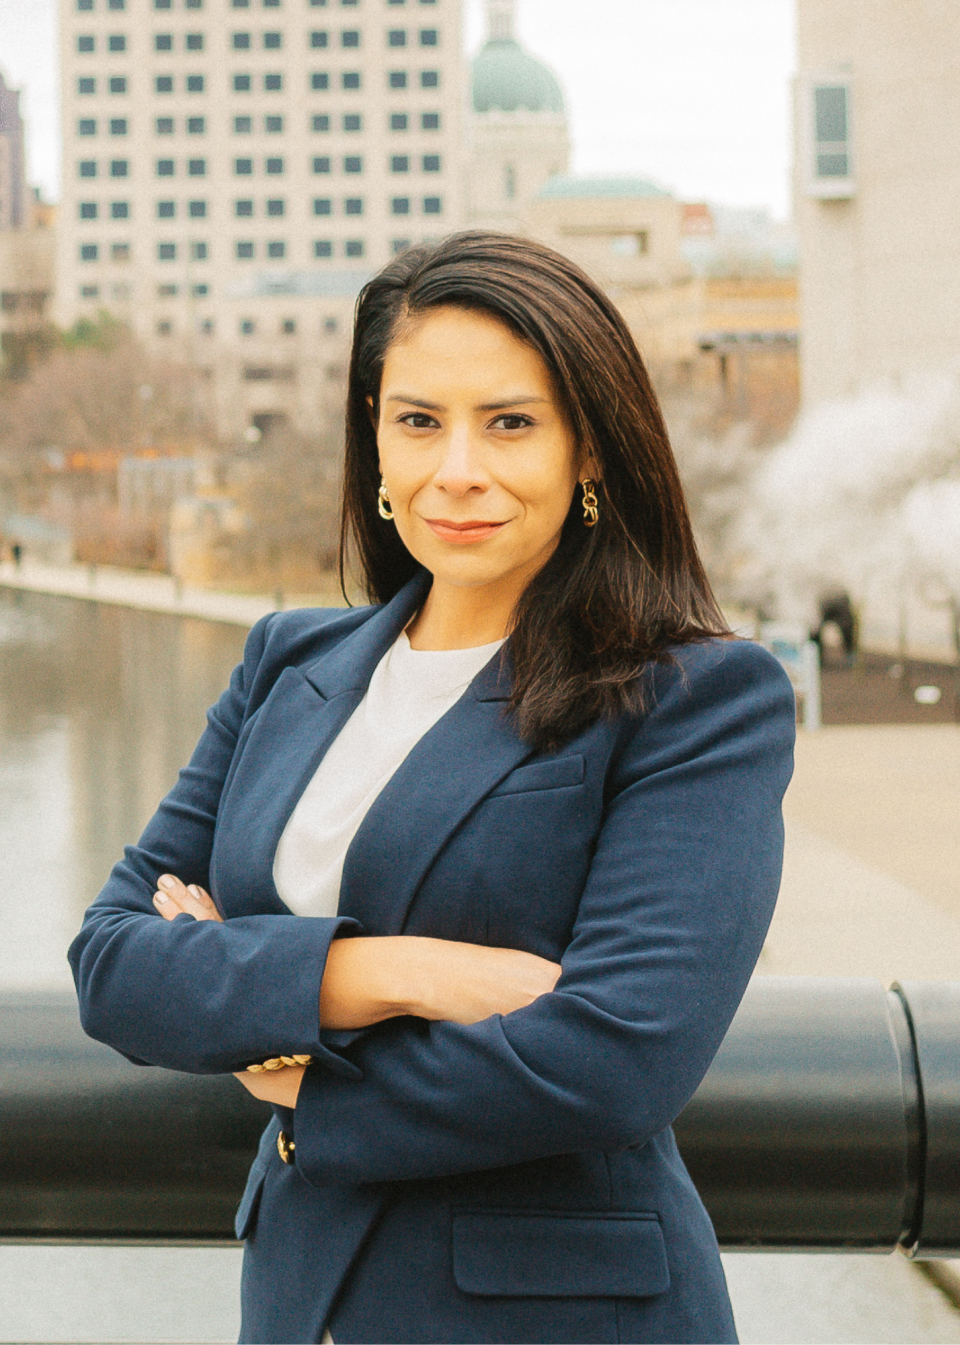 Cyndi Carrasco is the Marion County Republican Party's pick for the 2022 prosecutor race.